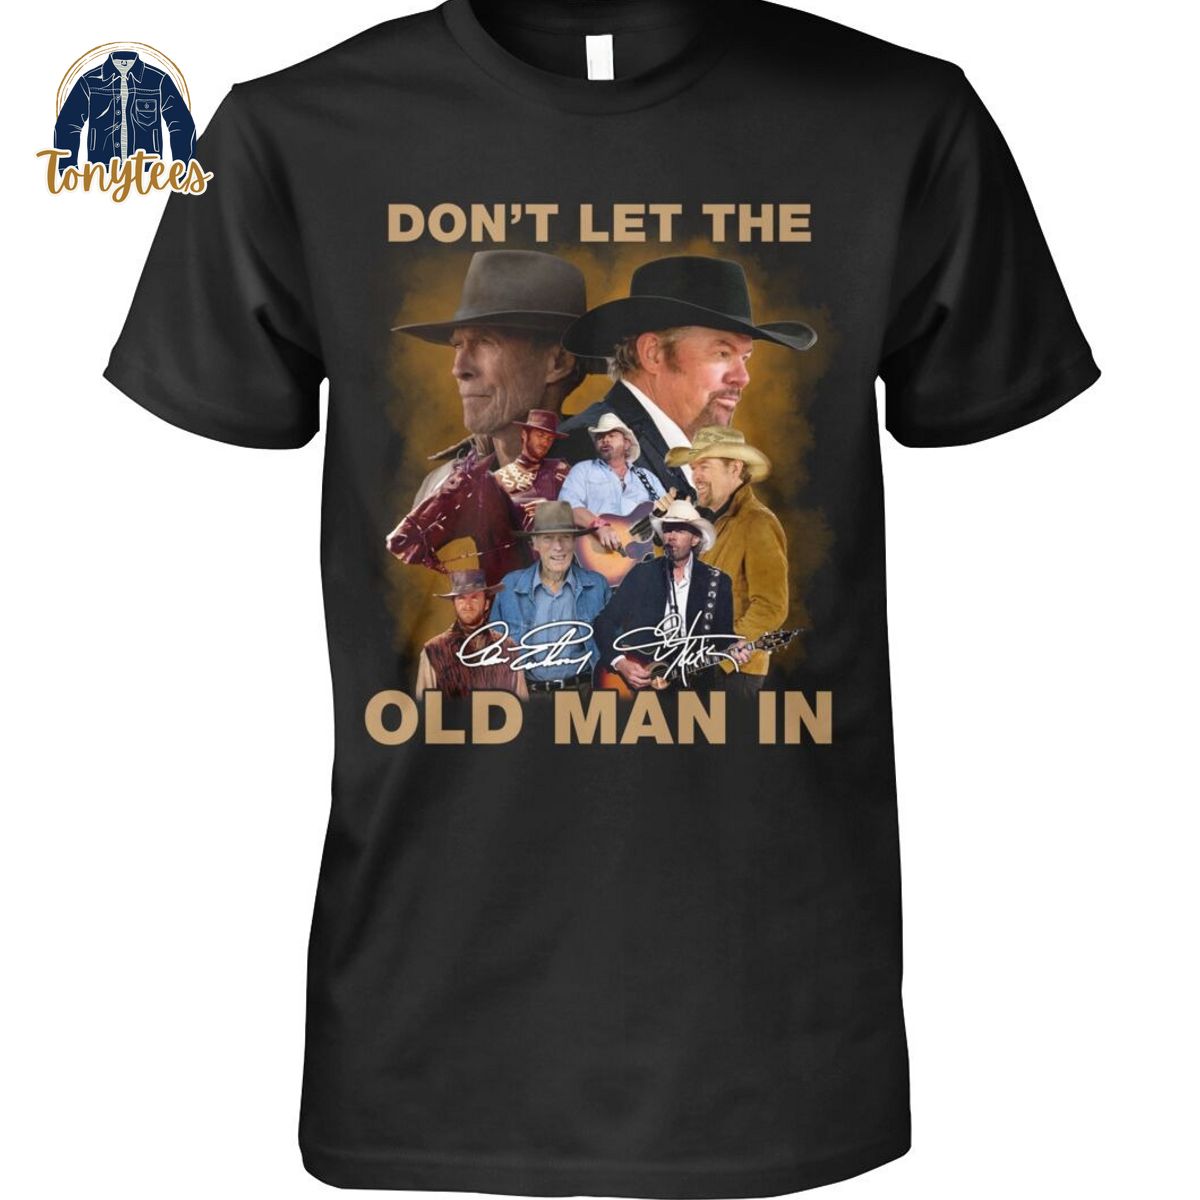 Clint Eastwood Toby Keith don’t let the old man in shirt